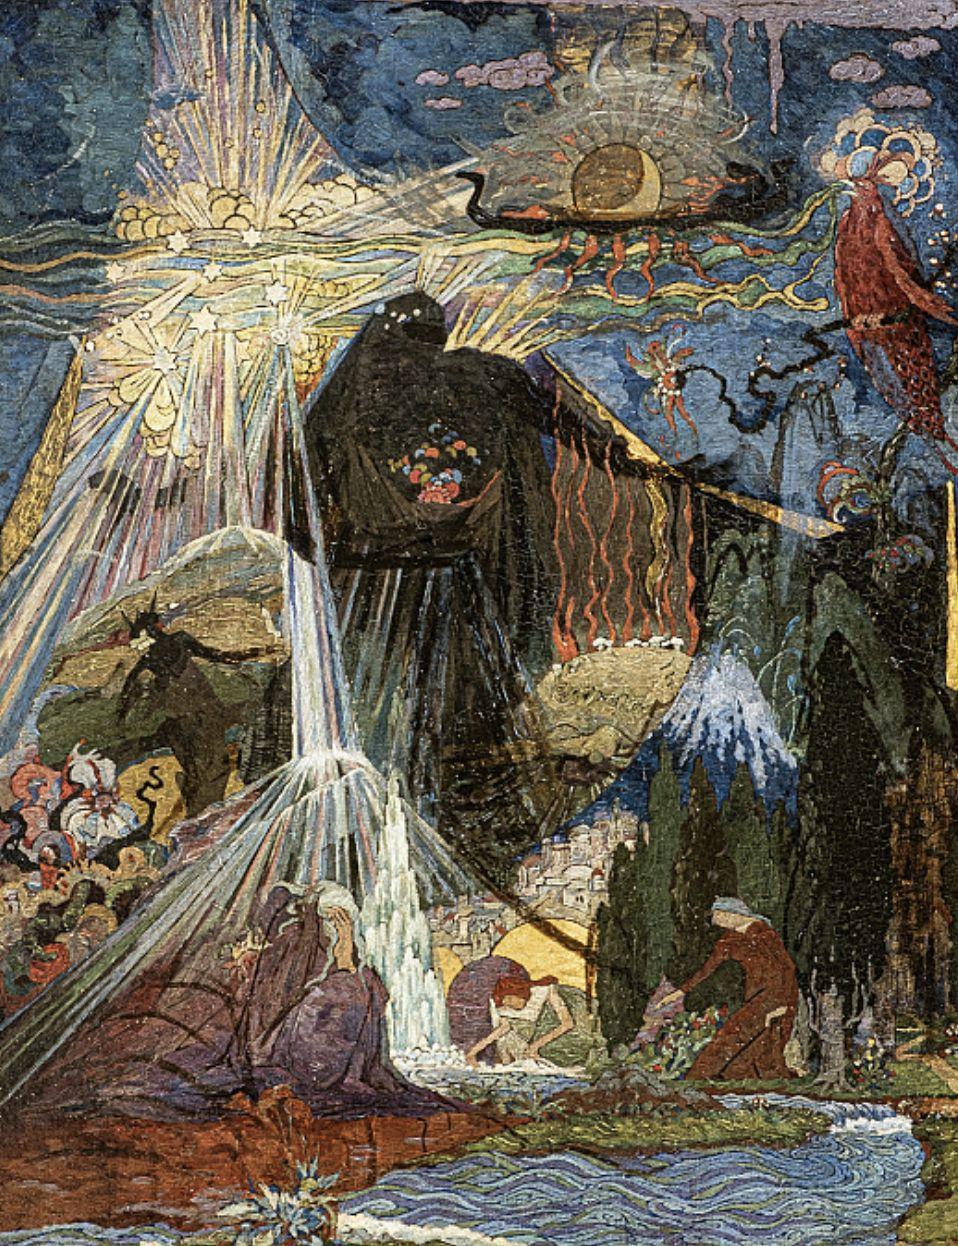 Master Of The Mysterious | Sidney Sime | Chris Beetles Gallery